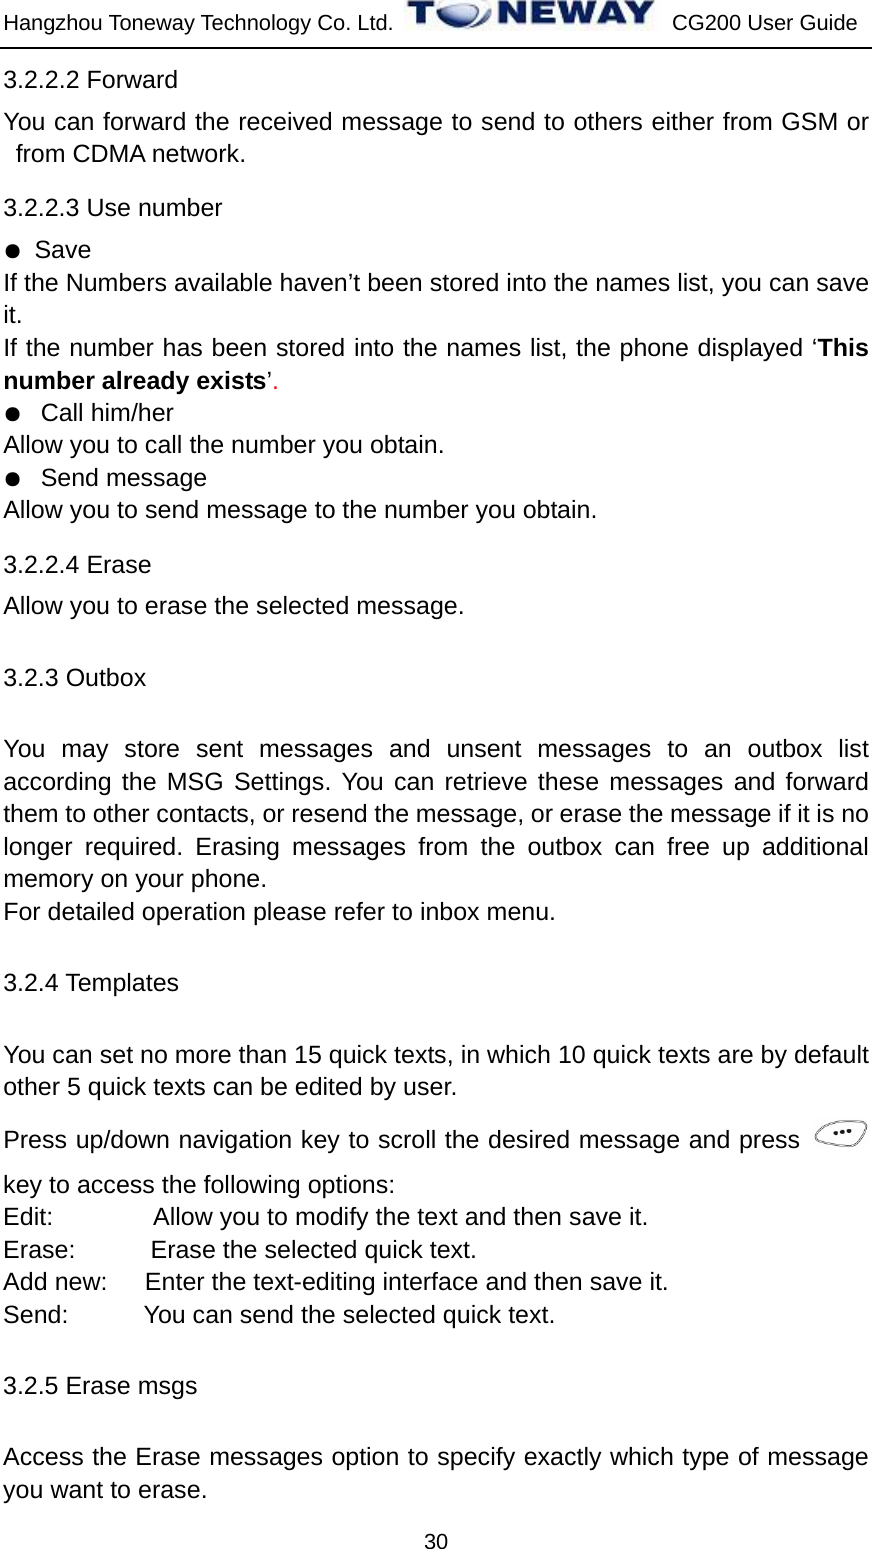 Hangzhou Toneway Technology Co. Ltd.    CG200 User Guide 30 3.2.2.2 Forward You can forward the received message to send to others either from GSM or from CDMA network.   3.2.2.3 Use number ● Save If the Numbers available haven’t been stored into the names list, you can save it. If the number has been stored into the names list, the phone displayed ‘This number already exists’. ●  Call him/her Allow you to call the number you obtain. ●  Send message Allow you to send message to the number you obtain. 3.2.2.4 Erase Allow you to erase the selected message. 3.2.3 Outbox You may store sent messages and unsent messages to an outbox list according the MSG Settings. You can retrieve these messages and forward them to other contacts, or resend the message, or erase the message if it is no longer required. Erasing messages from the outbox can free up additional memory on your phone.   For detailed operation please refer to inbox menu. 3.2.4 Templates You can set no more than 15 quick texts, in which 10 quick texts are by default other 5 quick texts can be edited by user.   Press up/down navigation key to scroll the desired message and press   key to access the following options: Edit:                Allow you to modify the text and then save it. Erase:      Erase the selected quick text. Add new:   Enter the text-editing interface and then save it. Send:      You can send the selected quick text. 3.2.5 Erase msgs Access the Erase messages option to specify exactly which type of message you want to erase. 